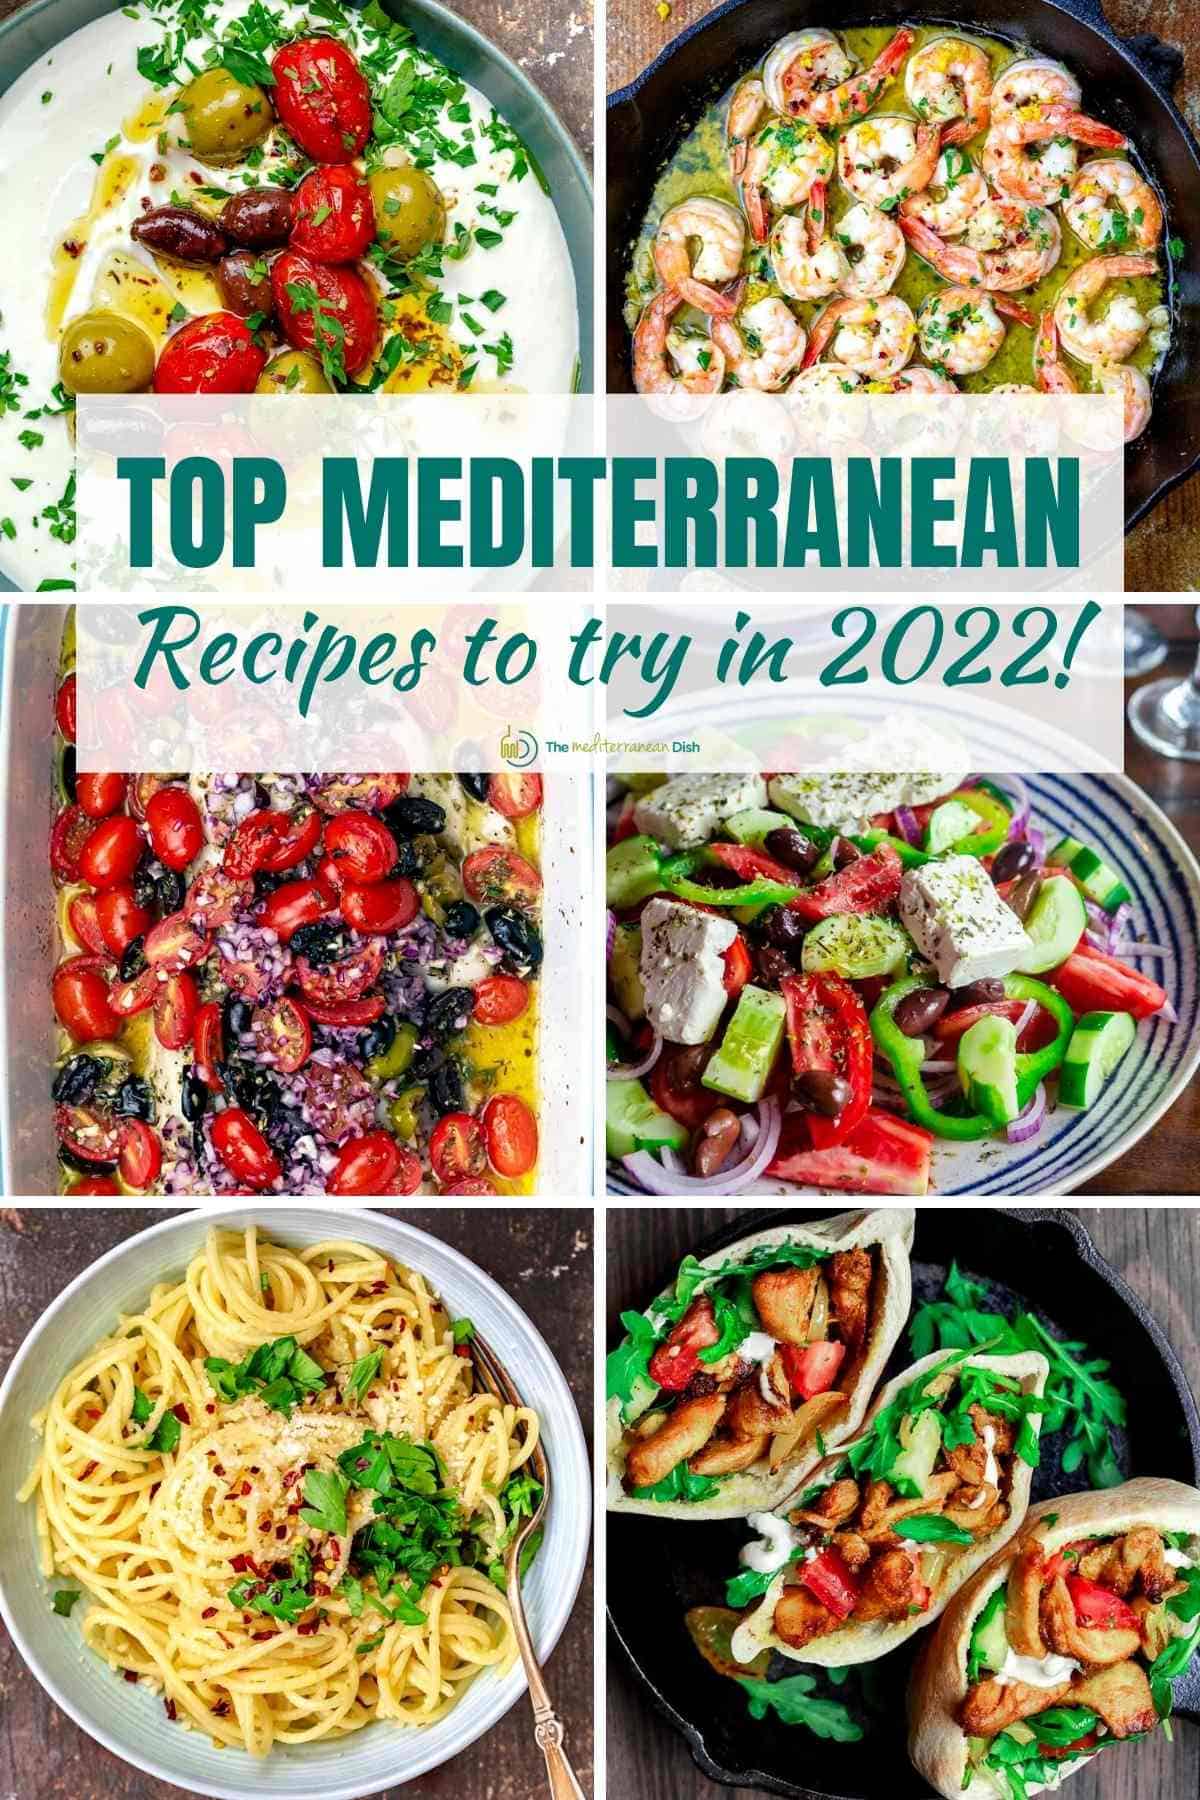 A collage of food images for the top Mediterranean recipes to try in 2022